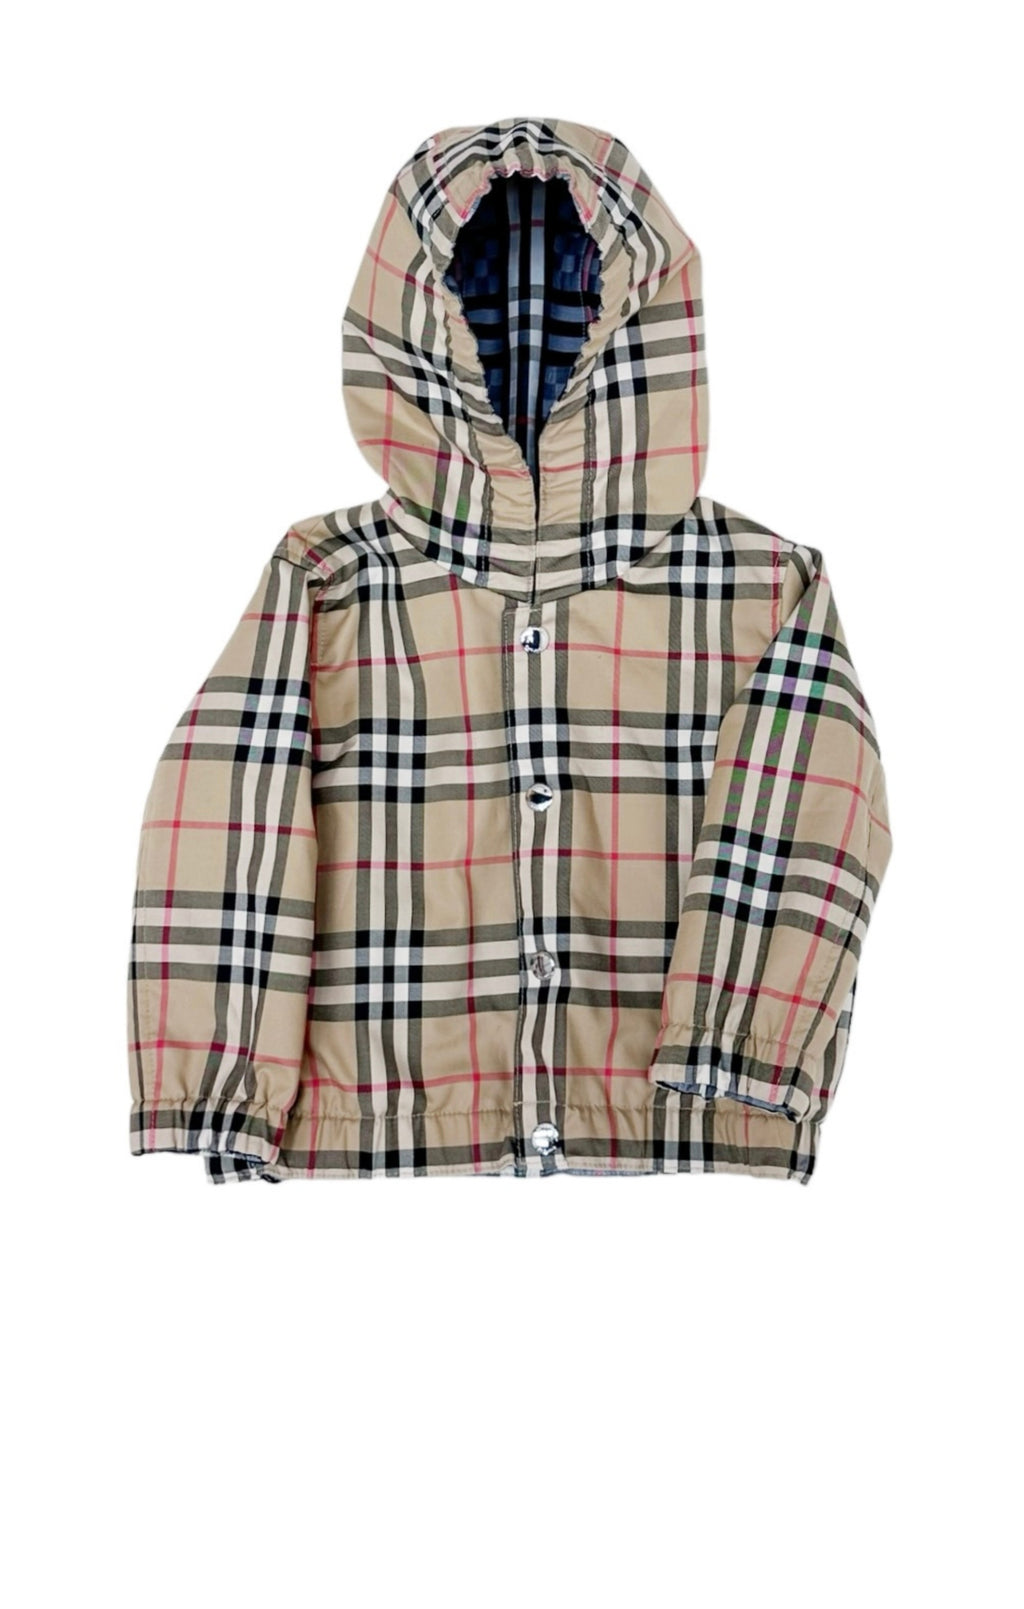 BURBERRY (NEW) with tags Jacket Size: 12 Months